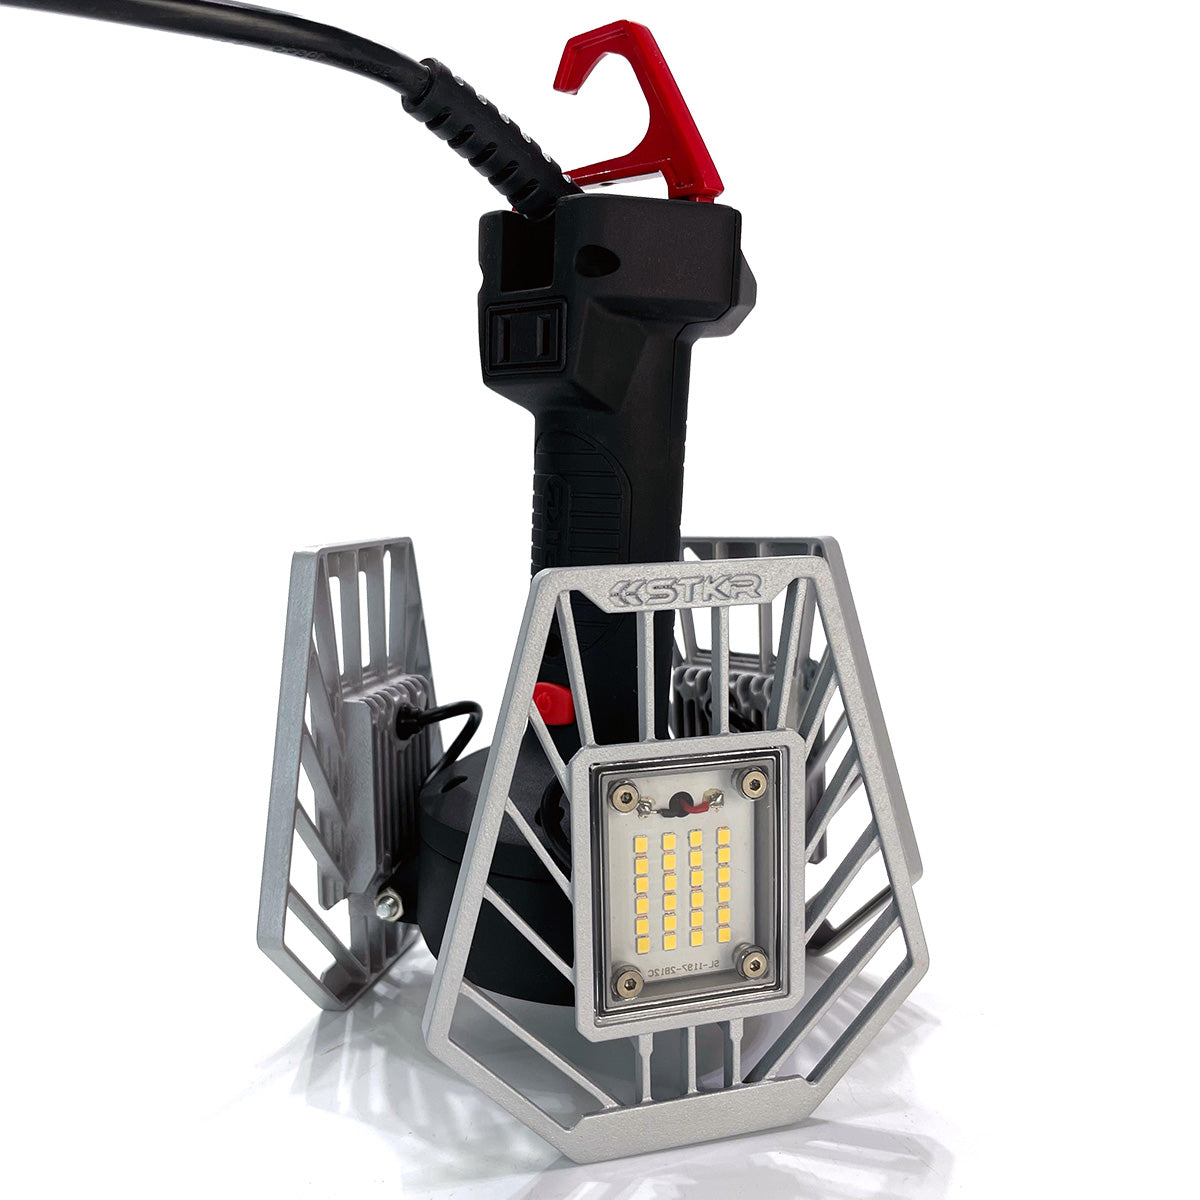 STKR Concepts TRiLIGHT ShopLight V2 in a hanging posture for drop light use in a white studio environment. Durable LED Aluminum Head Construction